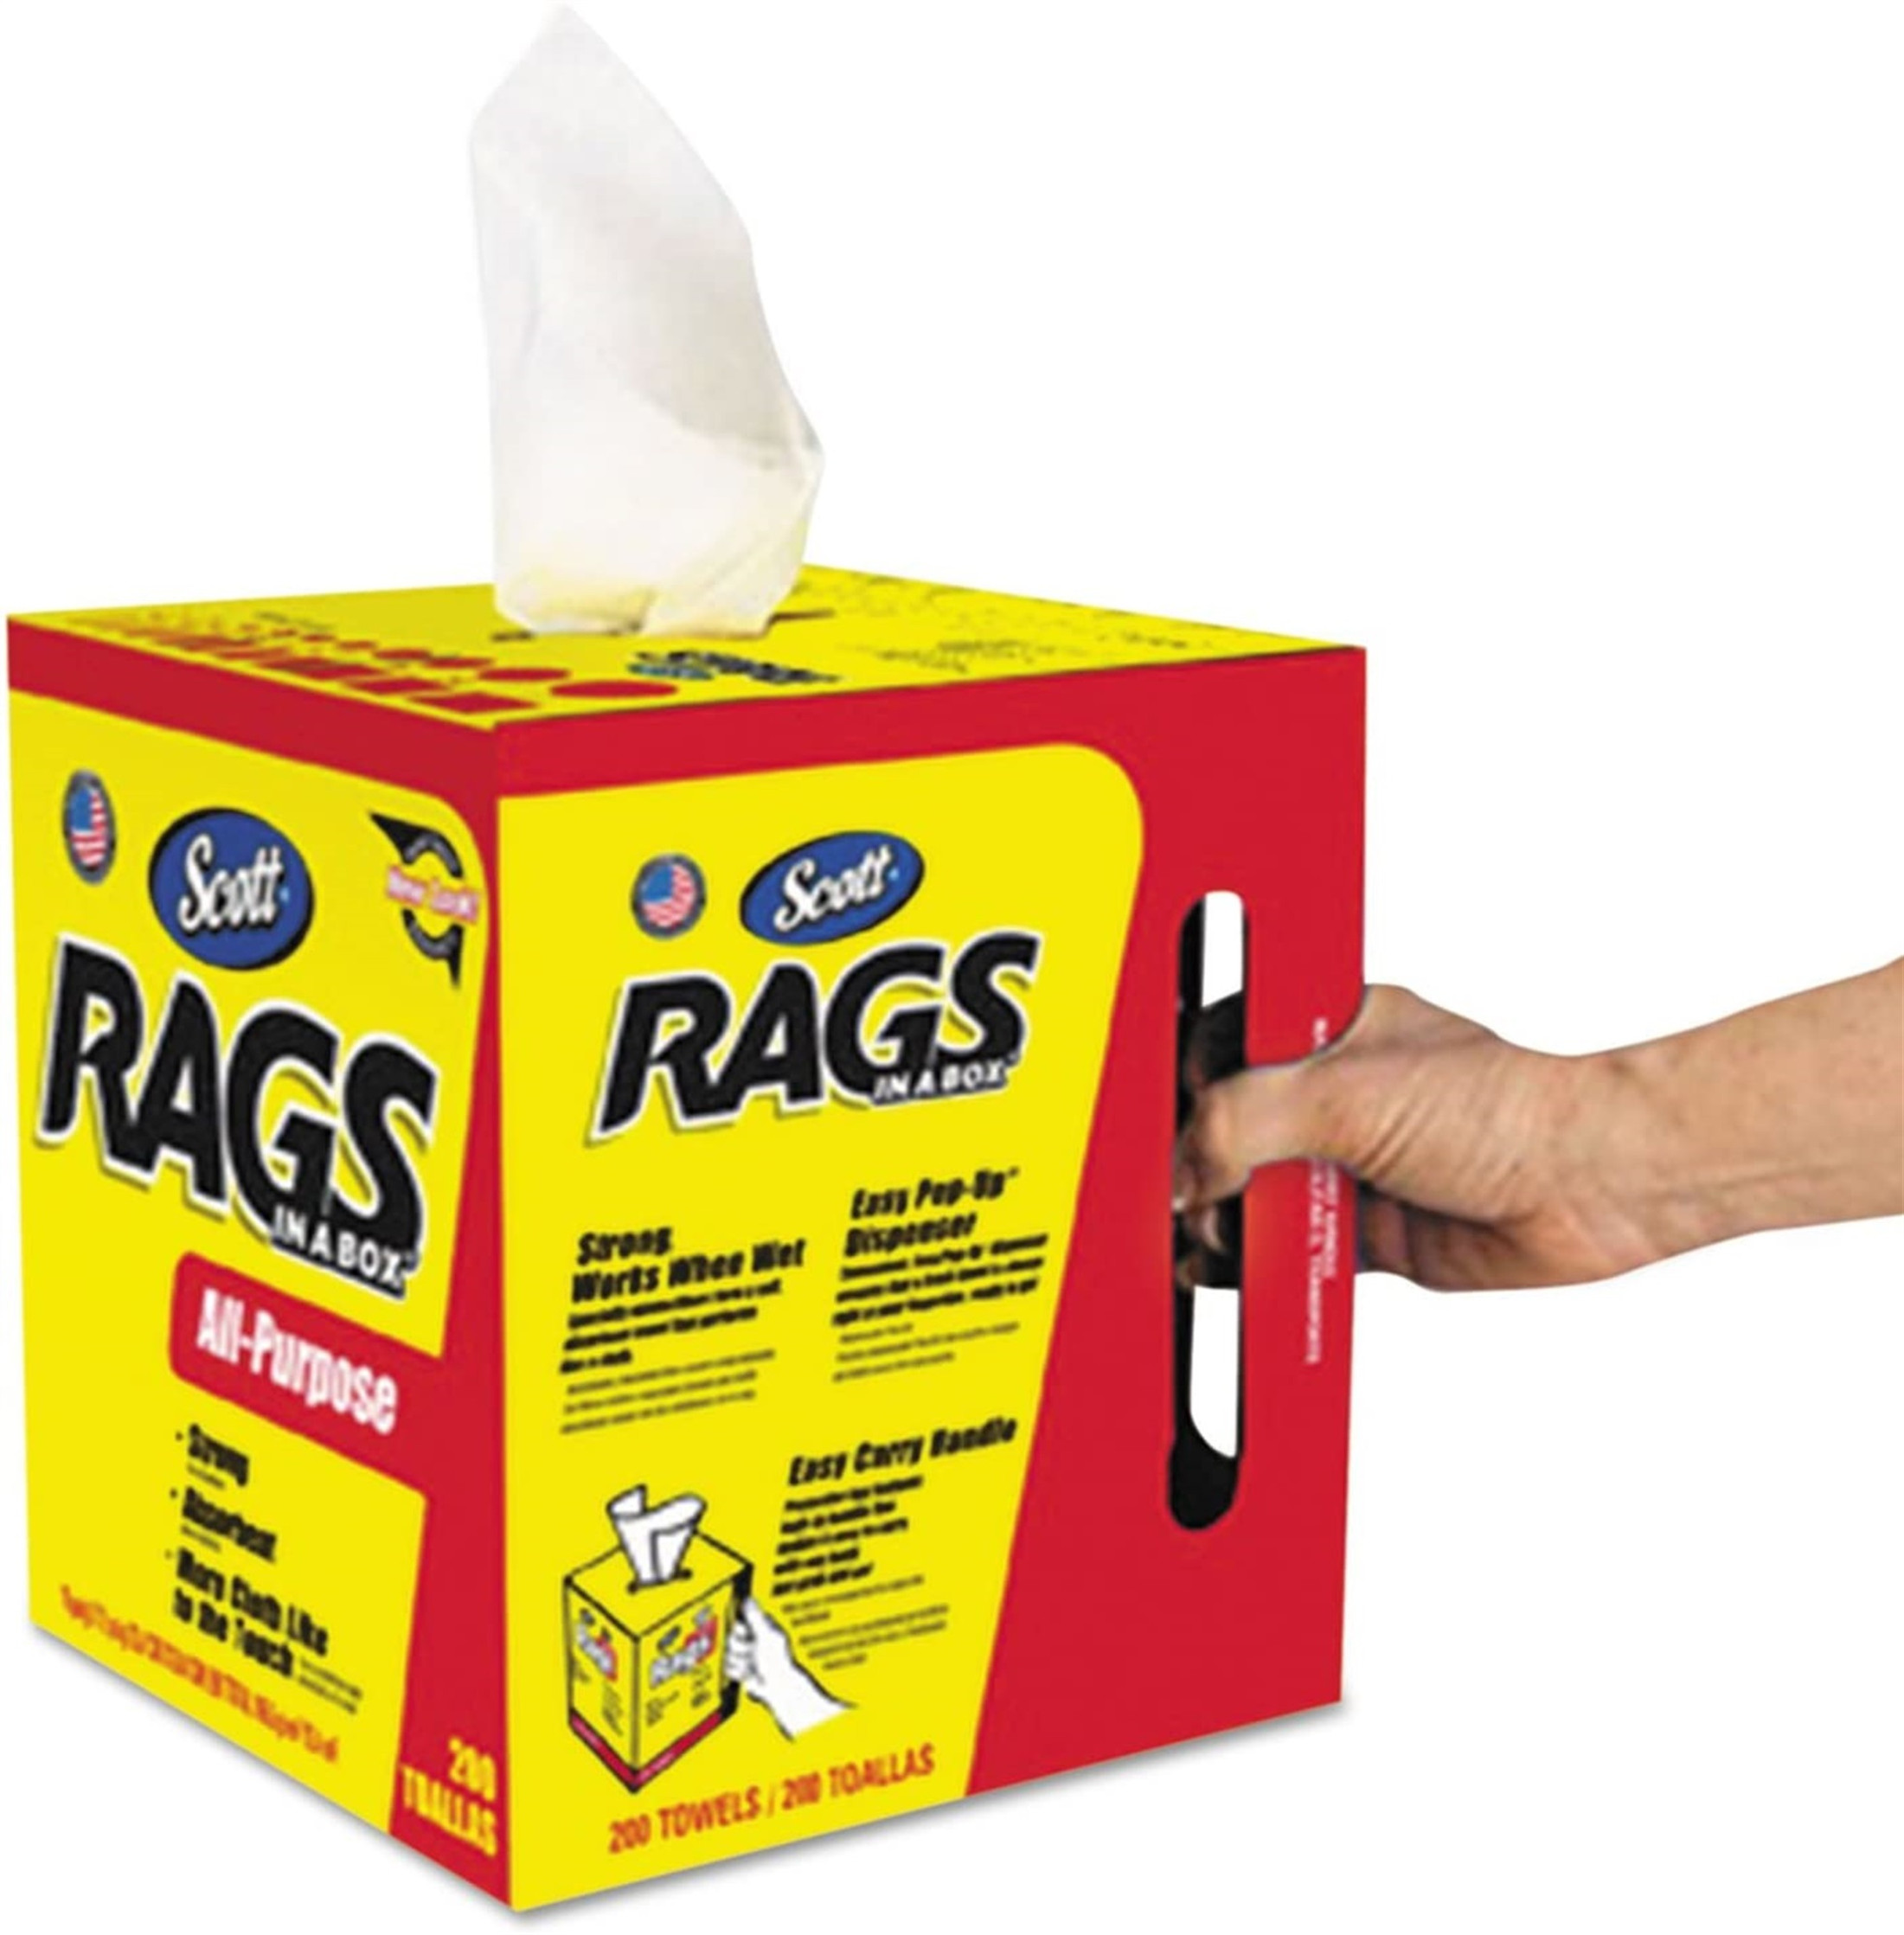 Kimberly Clark Scott Rags In A Box Shop Towels, 1 Box (200 count)